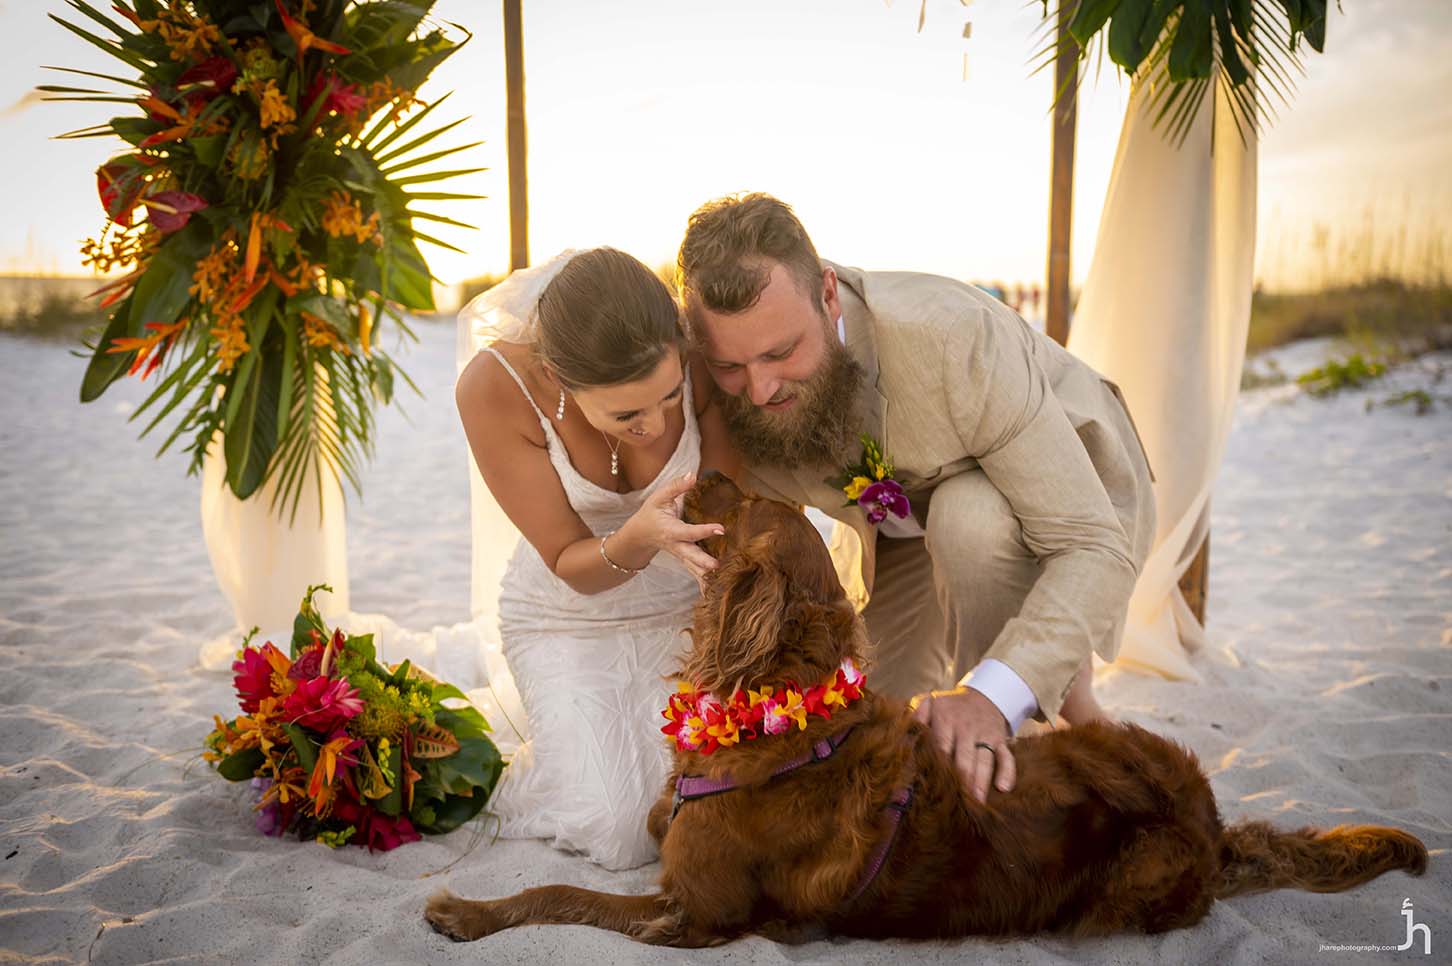 How to Have the Perfect Wedding Photos with Your Pet